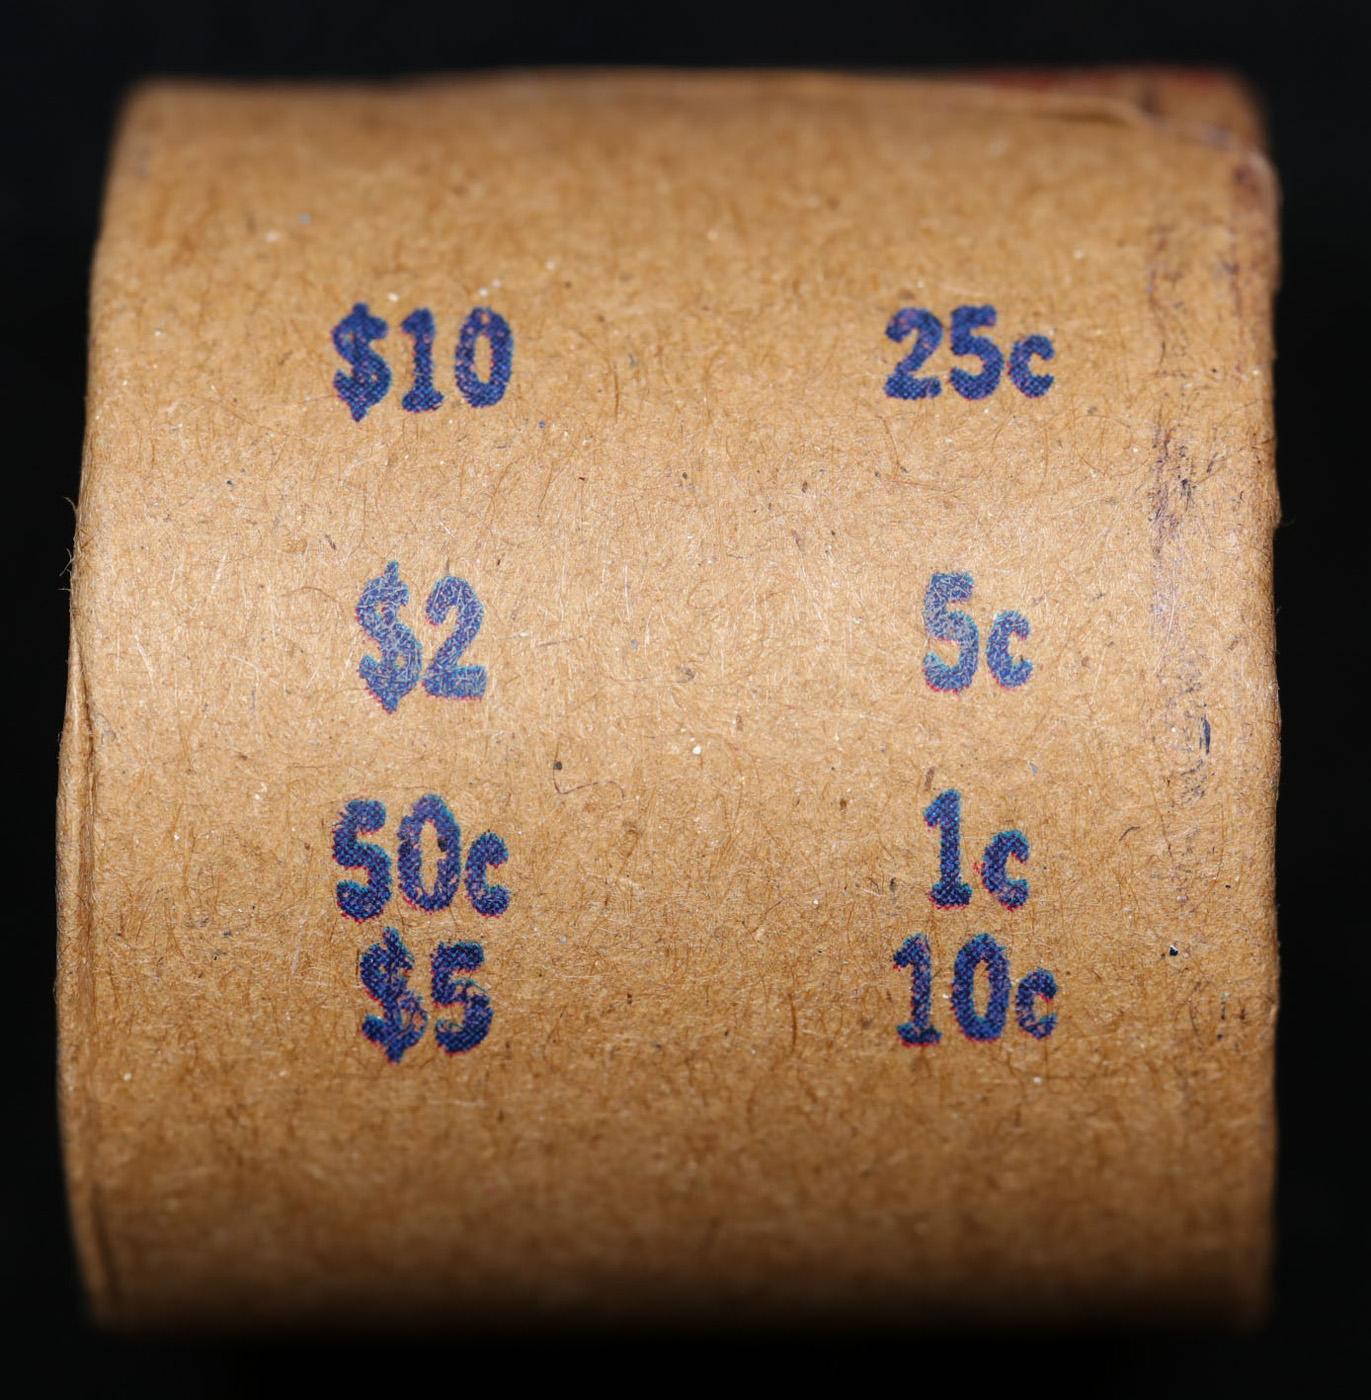 High Value! - Covered End Roll - Marked " Morgan Supreme" - Weight shows x10 Coins (FC)